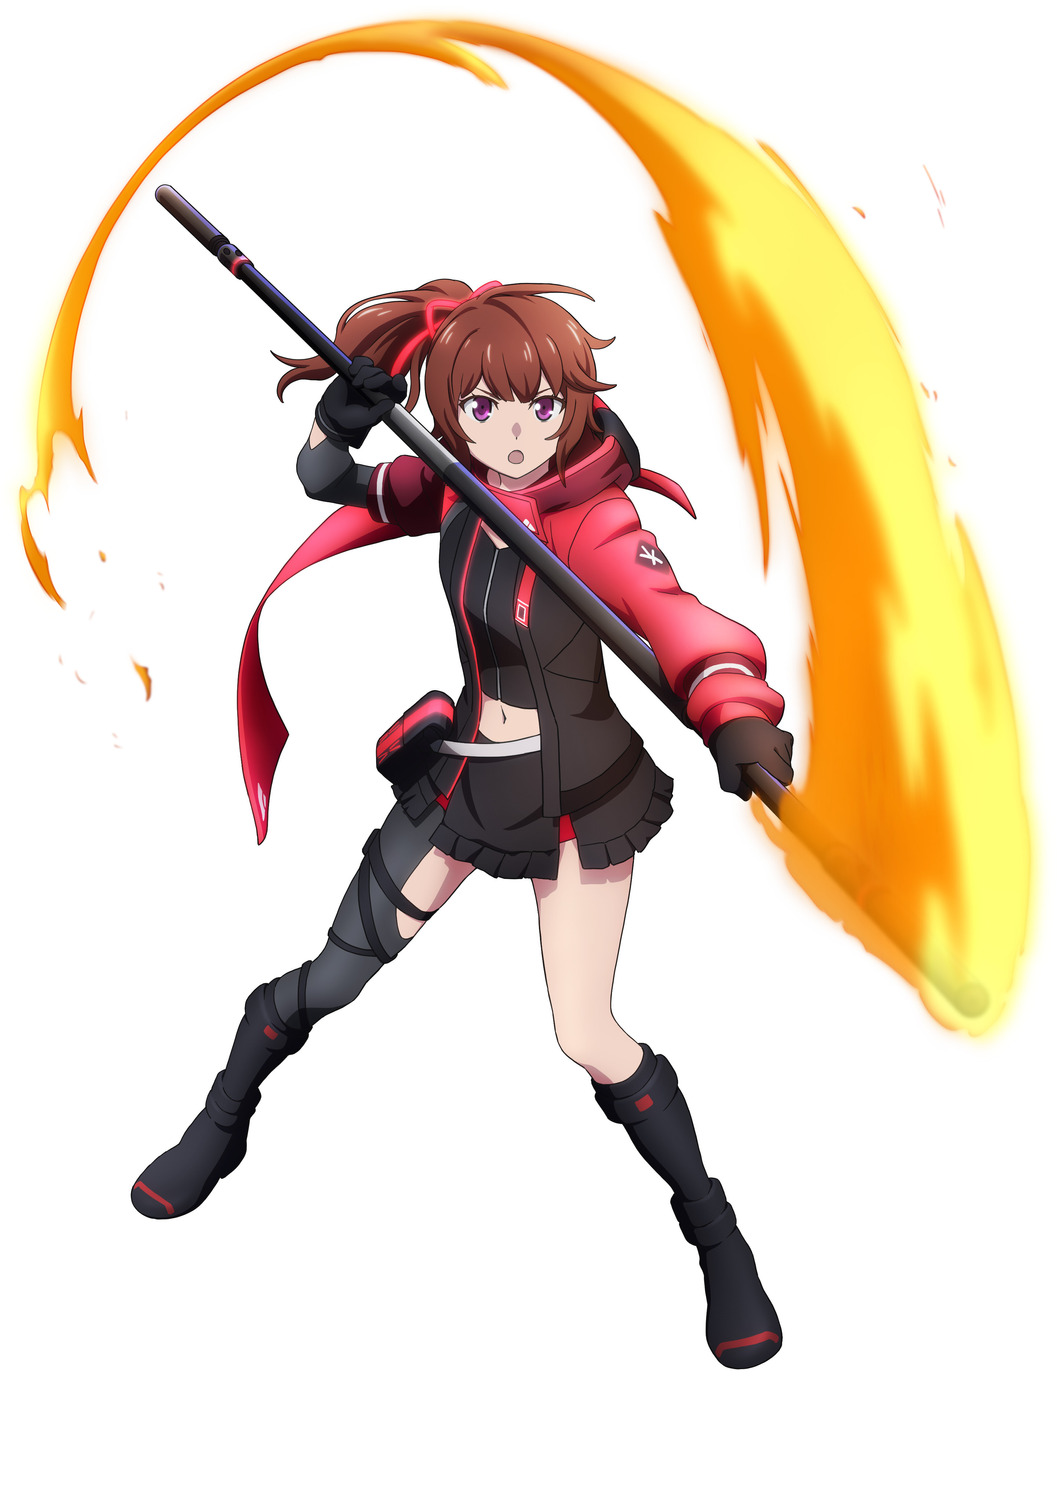 Scarlet Nexus Anime Trailer and Character Art Revealed